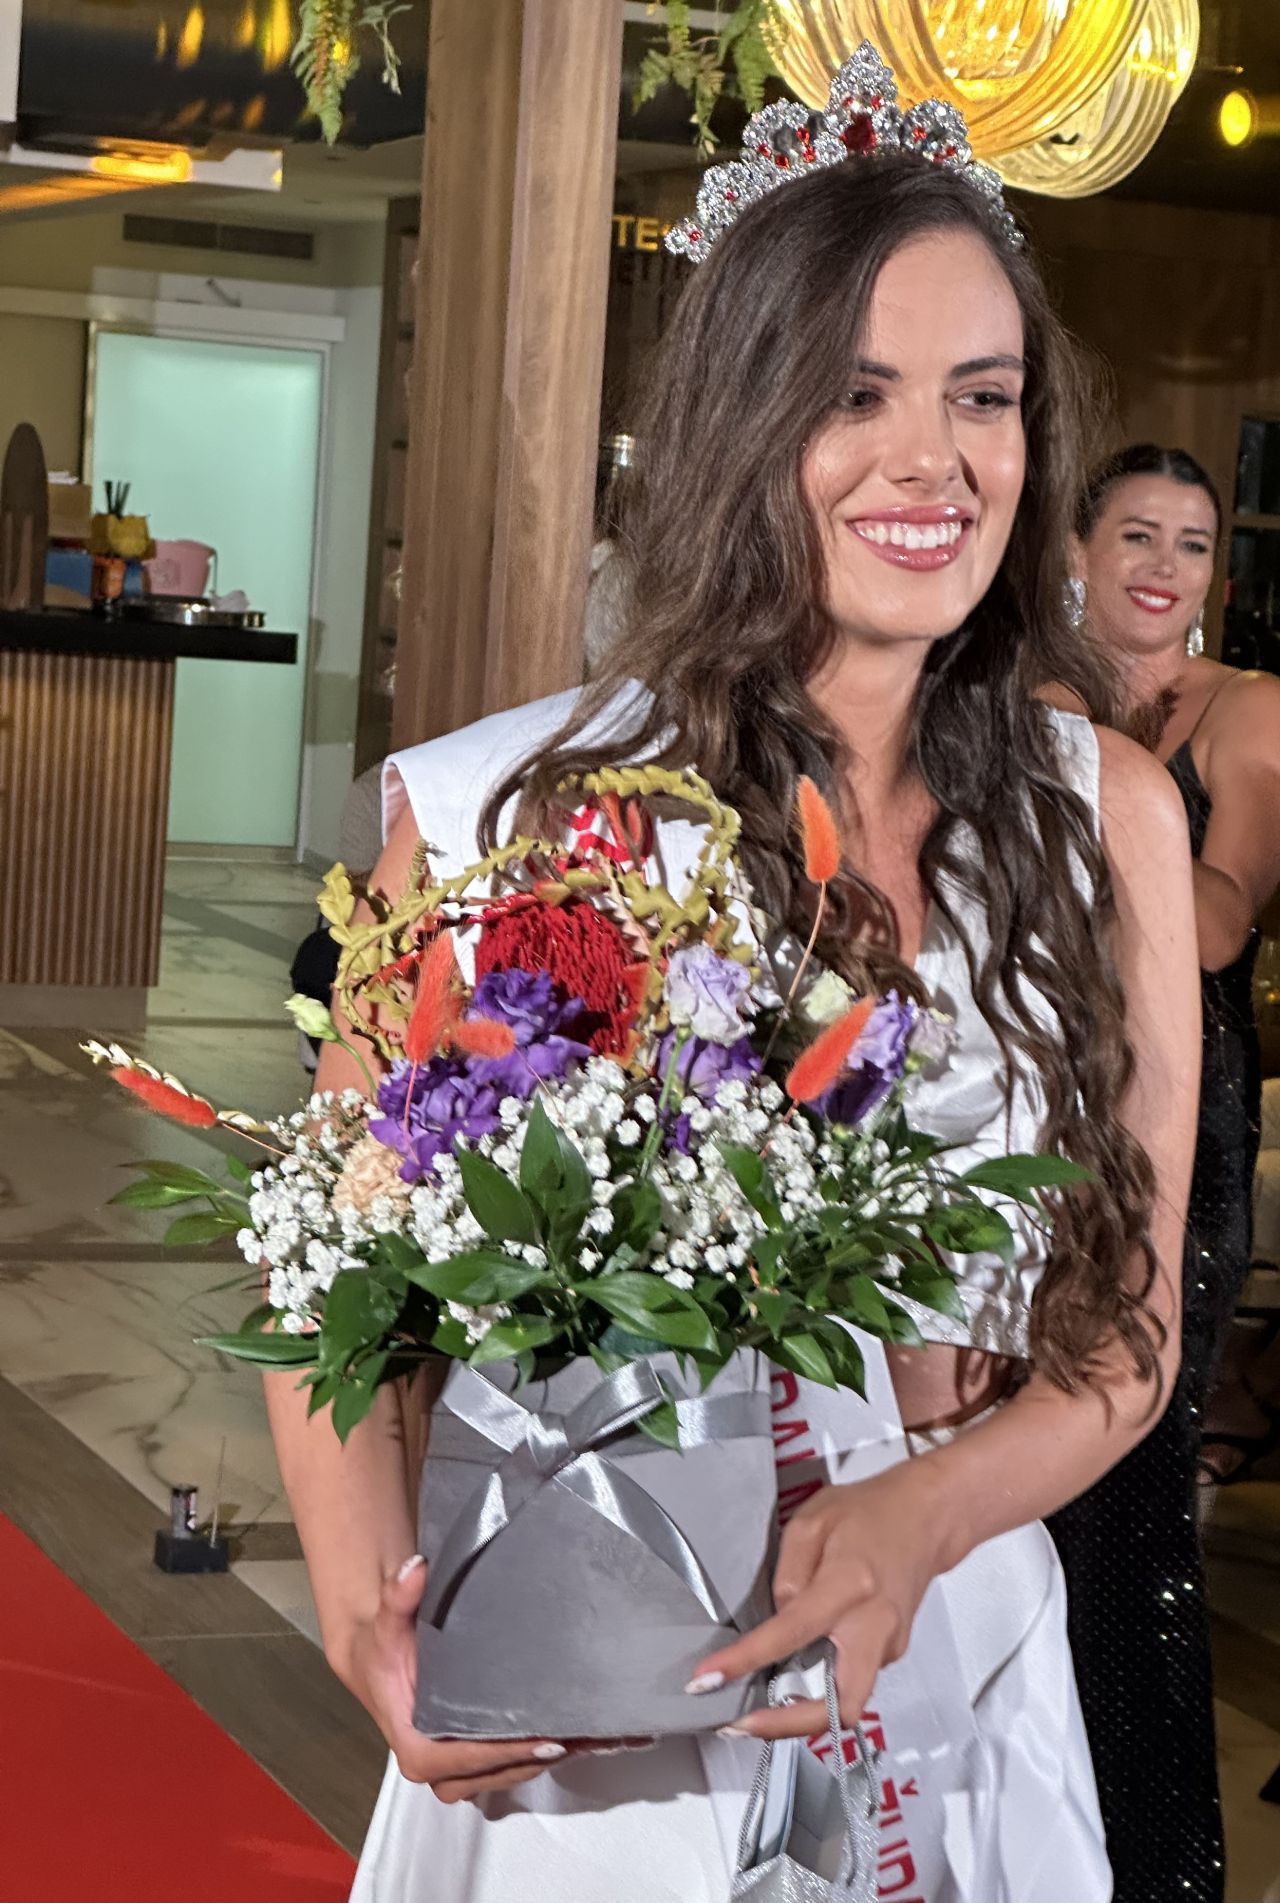 The most beautiful Dalmatian crowned in race for Miss World Croatia title